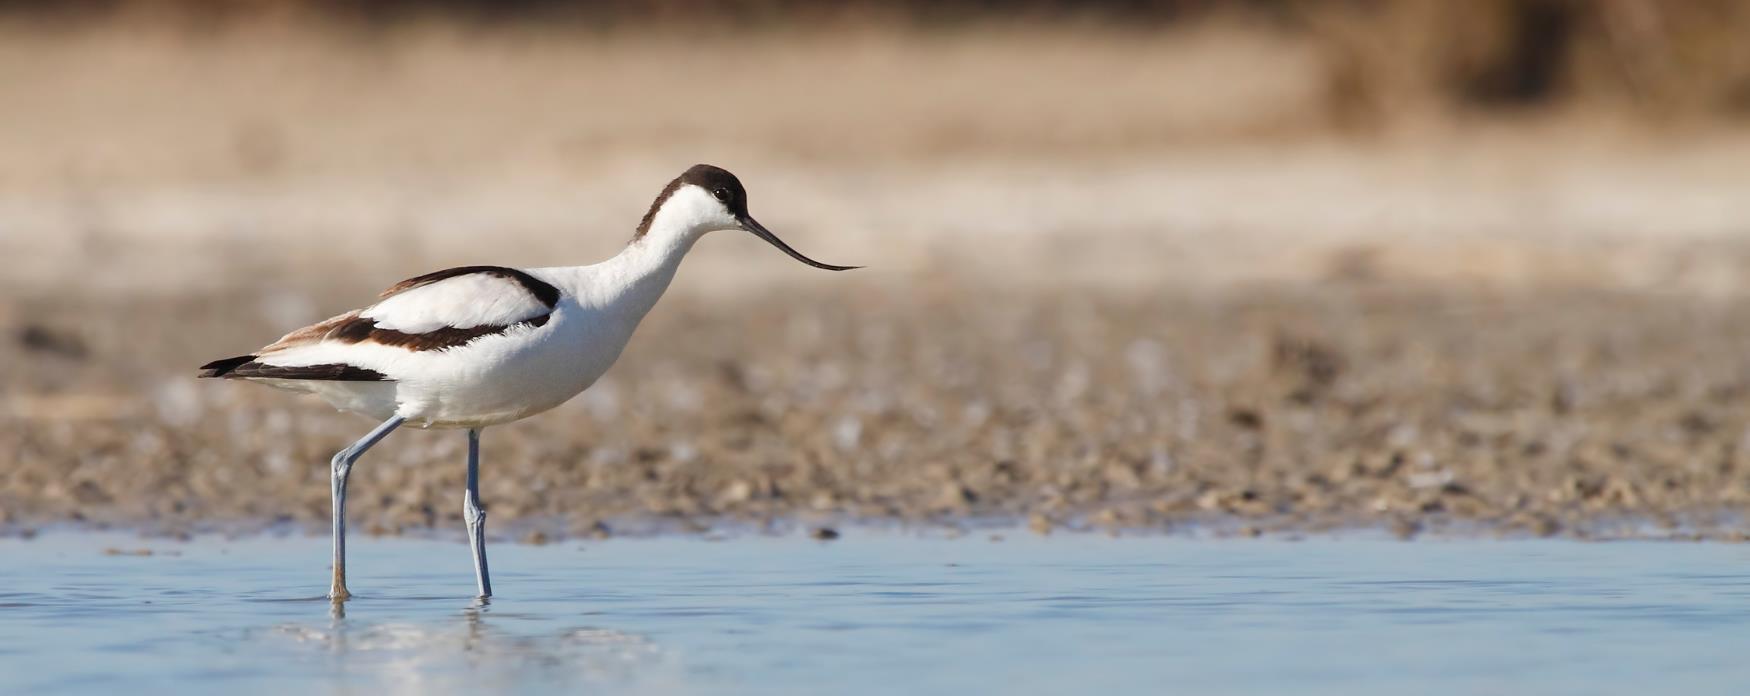 An Avocet bird wading in shallow water